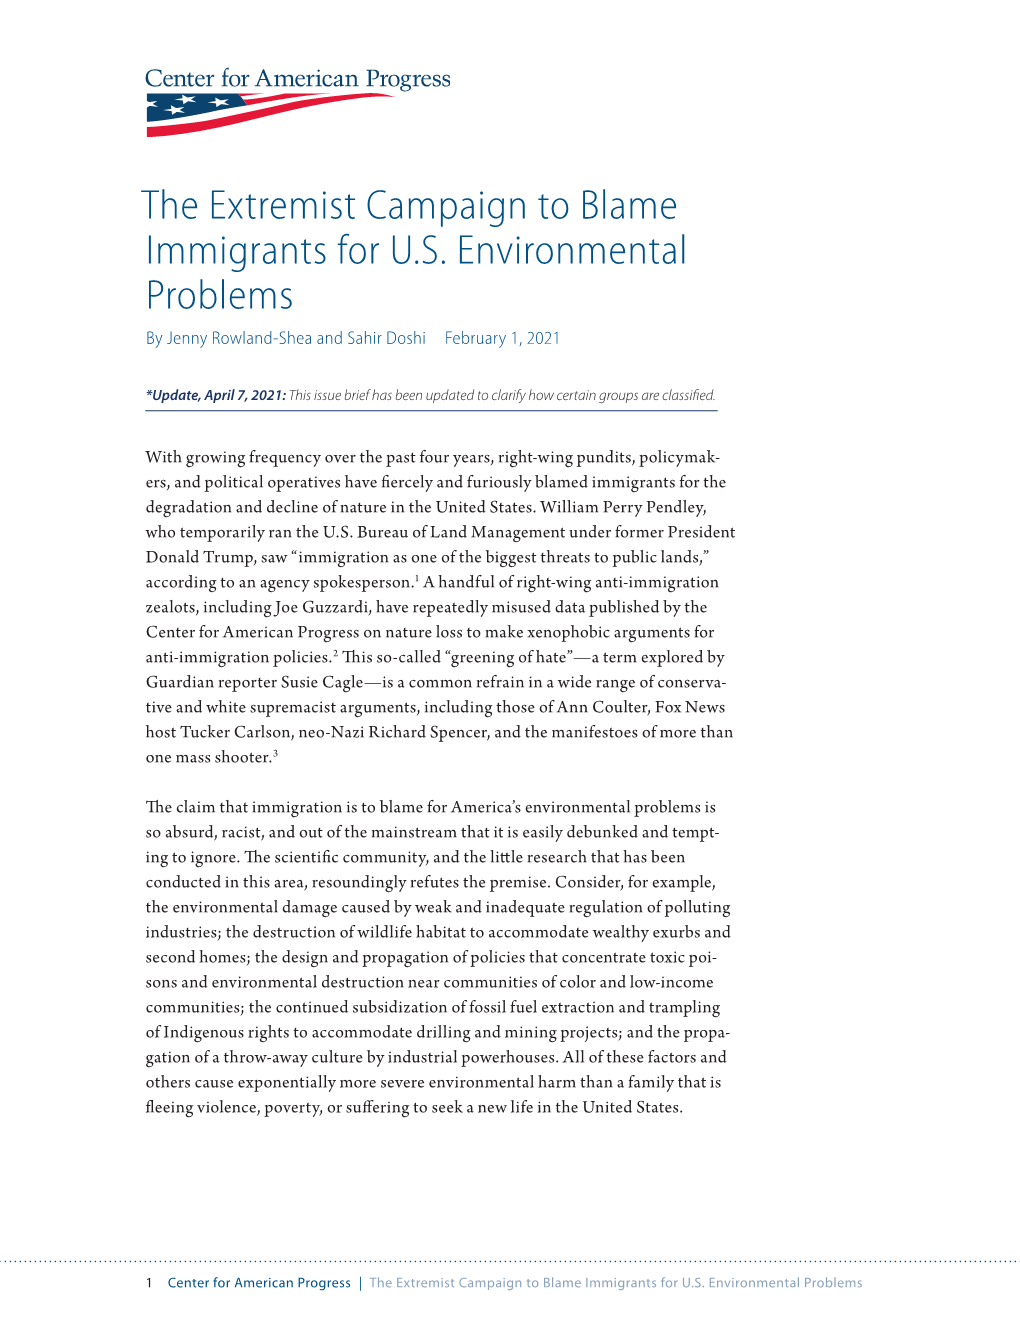 The Extremist Campaign to Blame Immigrants for U.S